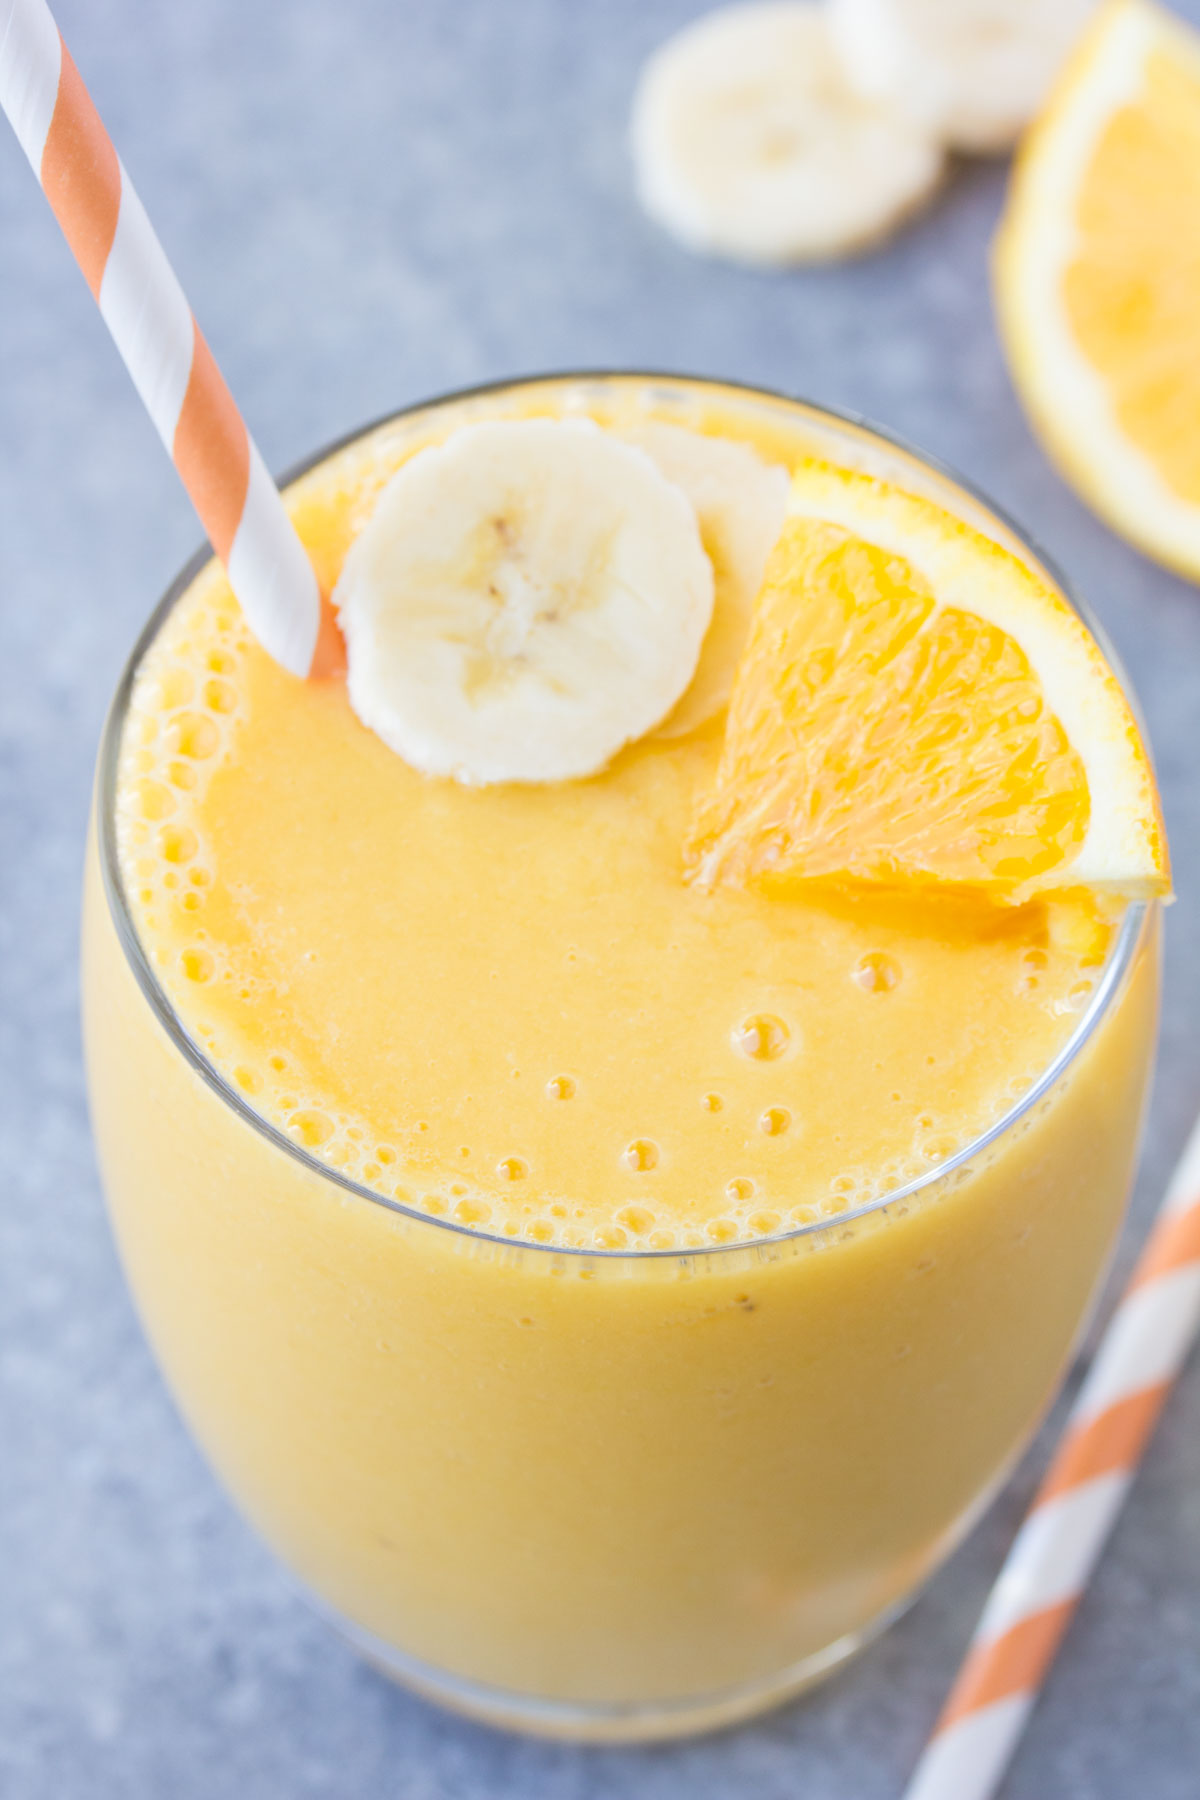 Orange smoothie in a glass with banana slice and orange wedge.